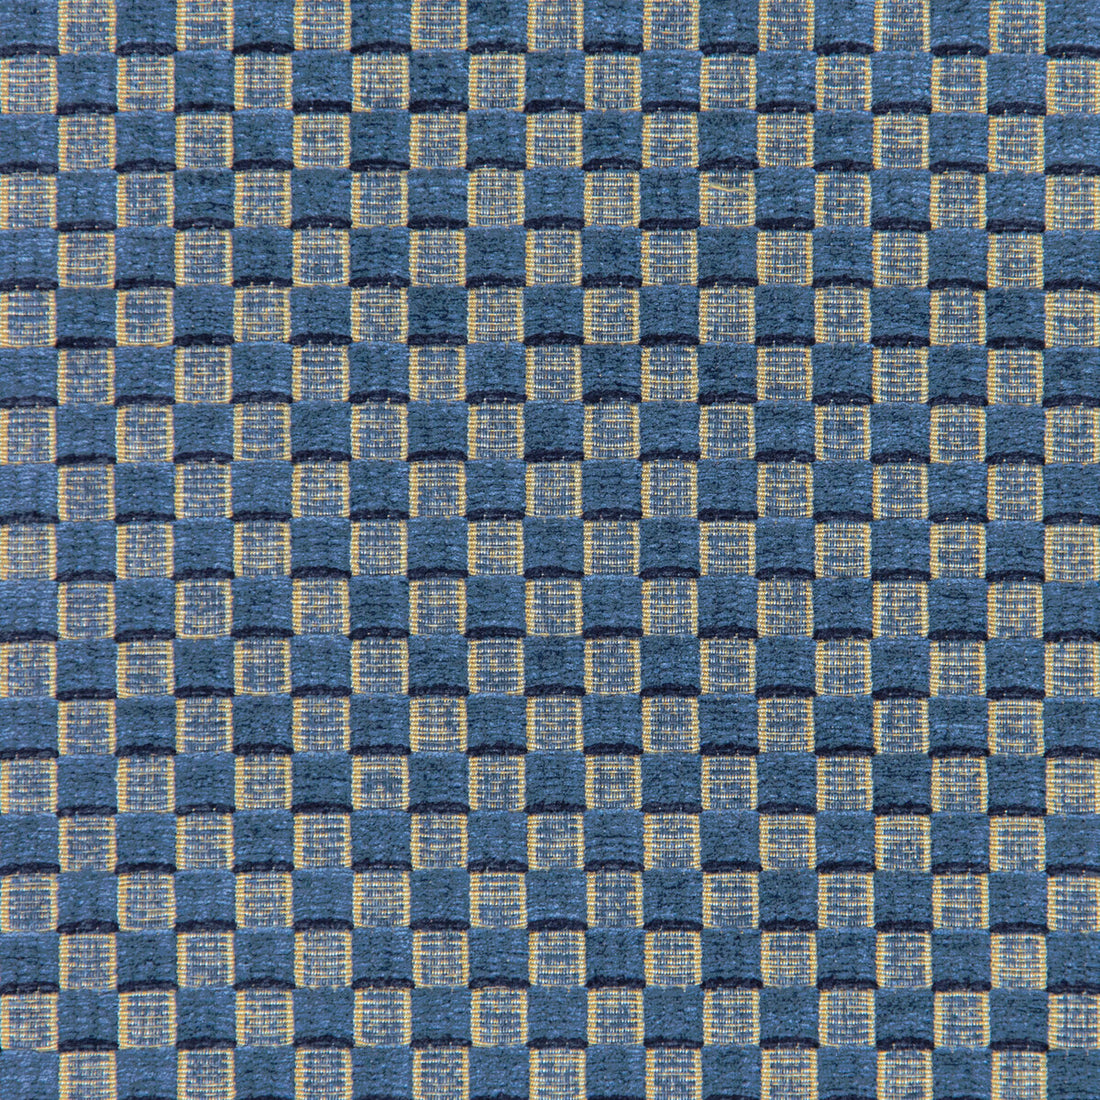 Allonby Weave fabric in blue color - pattern 2020101.5.0 - by Lee Jofa in the Linford Weaves collection